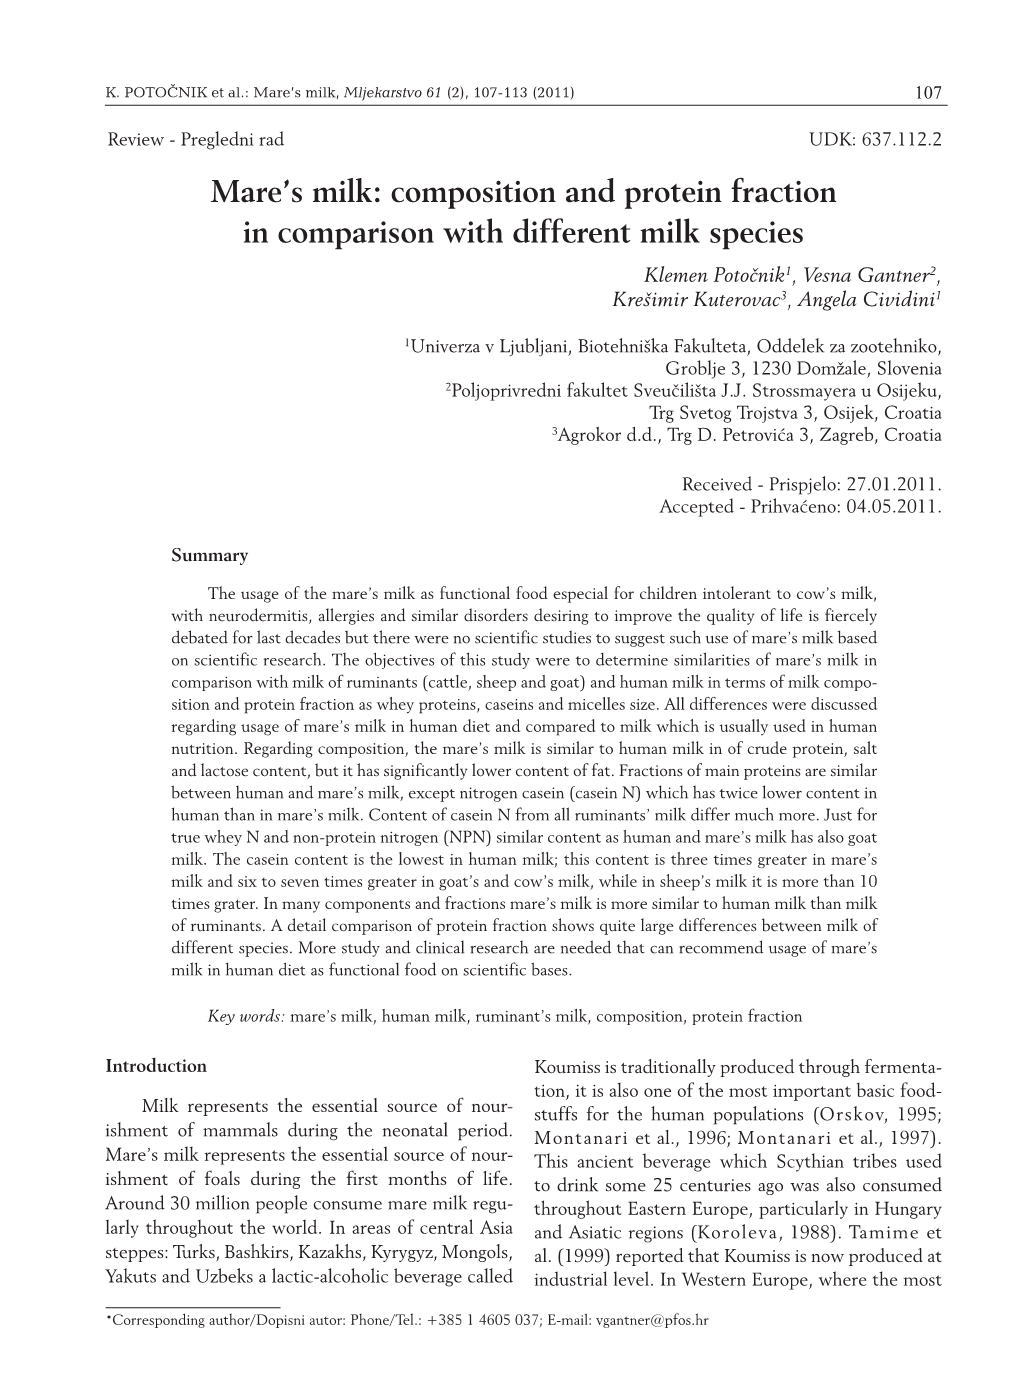 Mare's Milk: Composition and Protein Fraction in Comparison with Different Milk Species